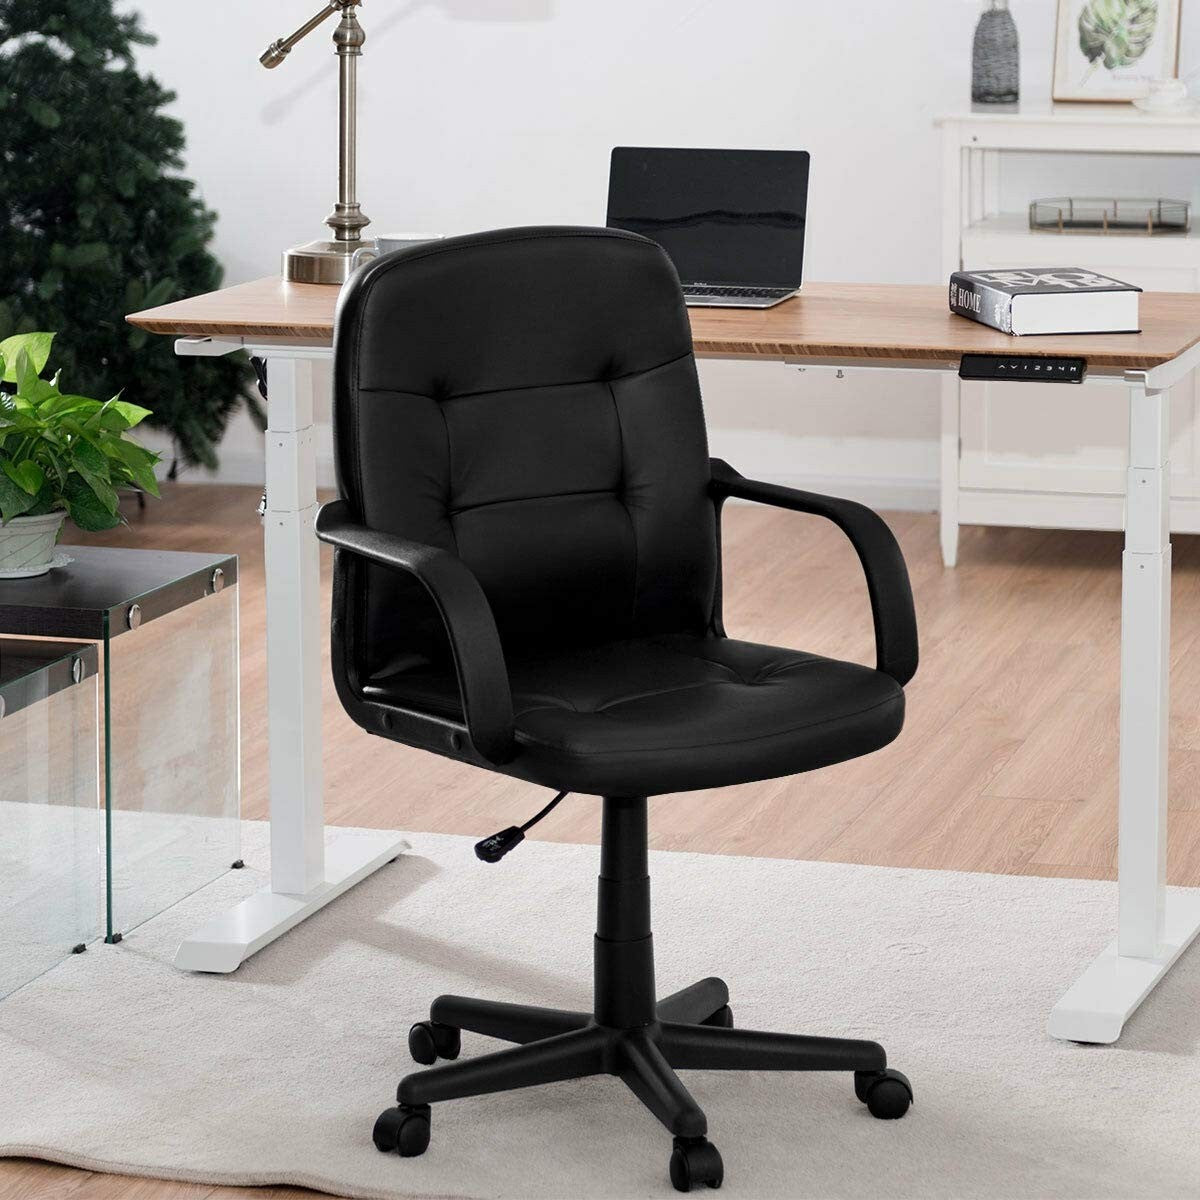 Executive Chair Mid Back Office W/Arms and Swivel Wheels